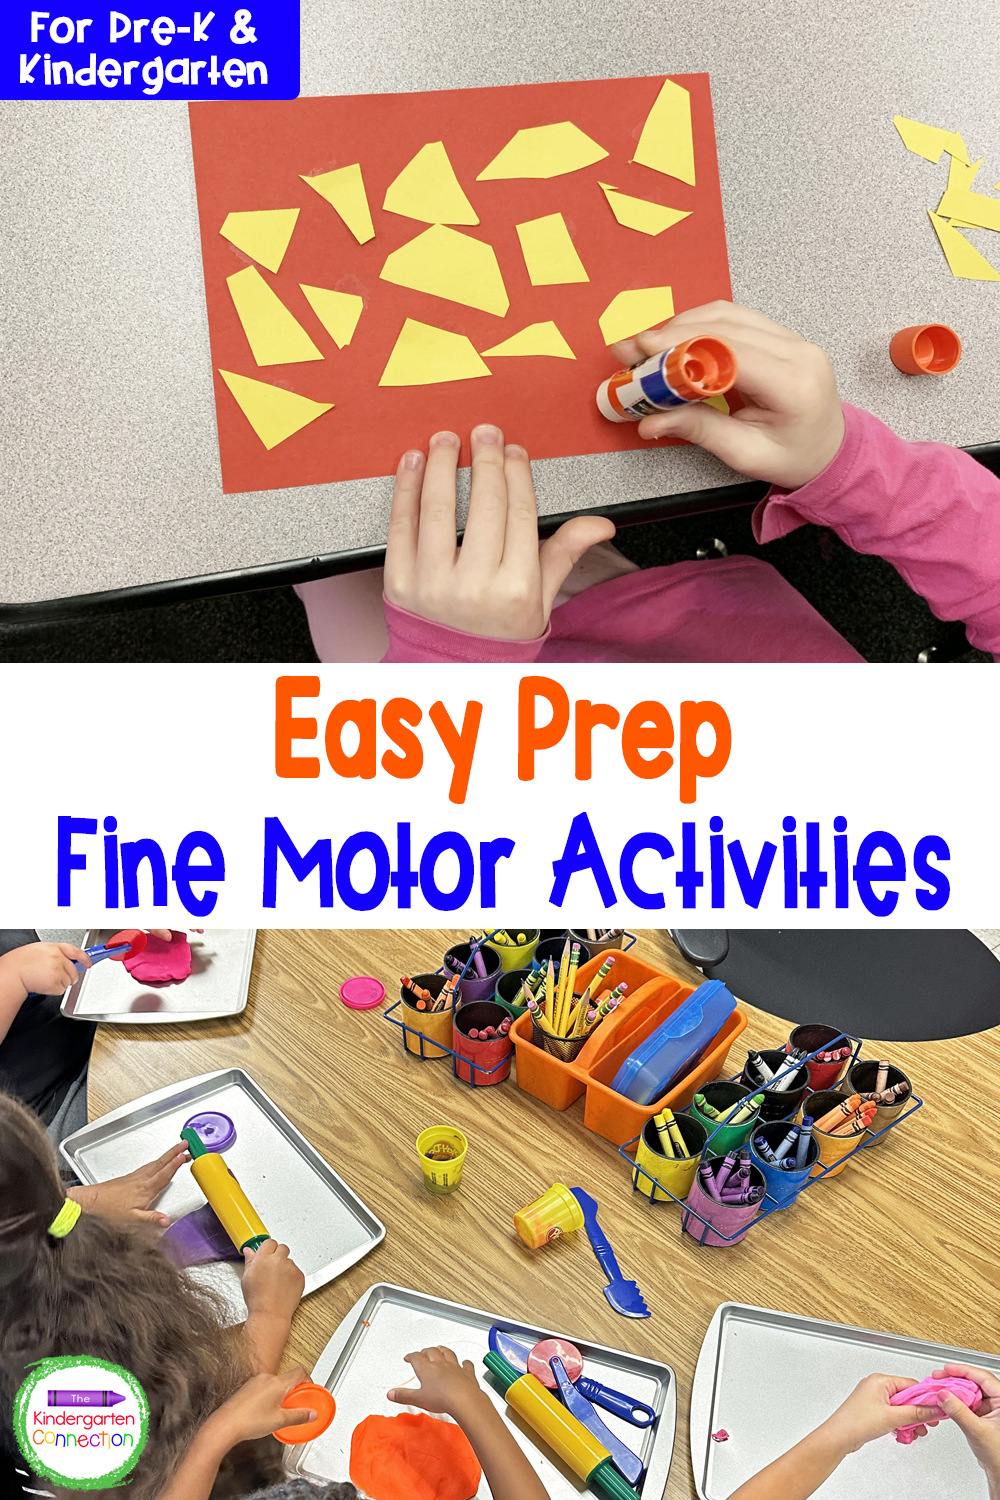 Looking for ways to help your students strengthen finger muscles? Try these easy fine motor activities that don’t use a pencil!